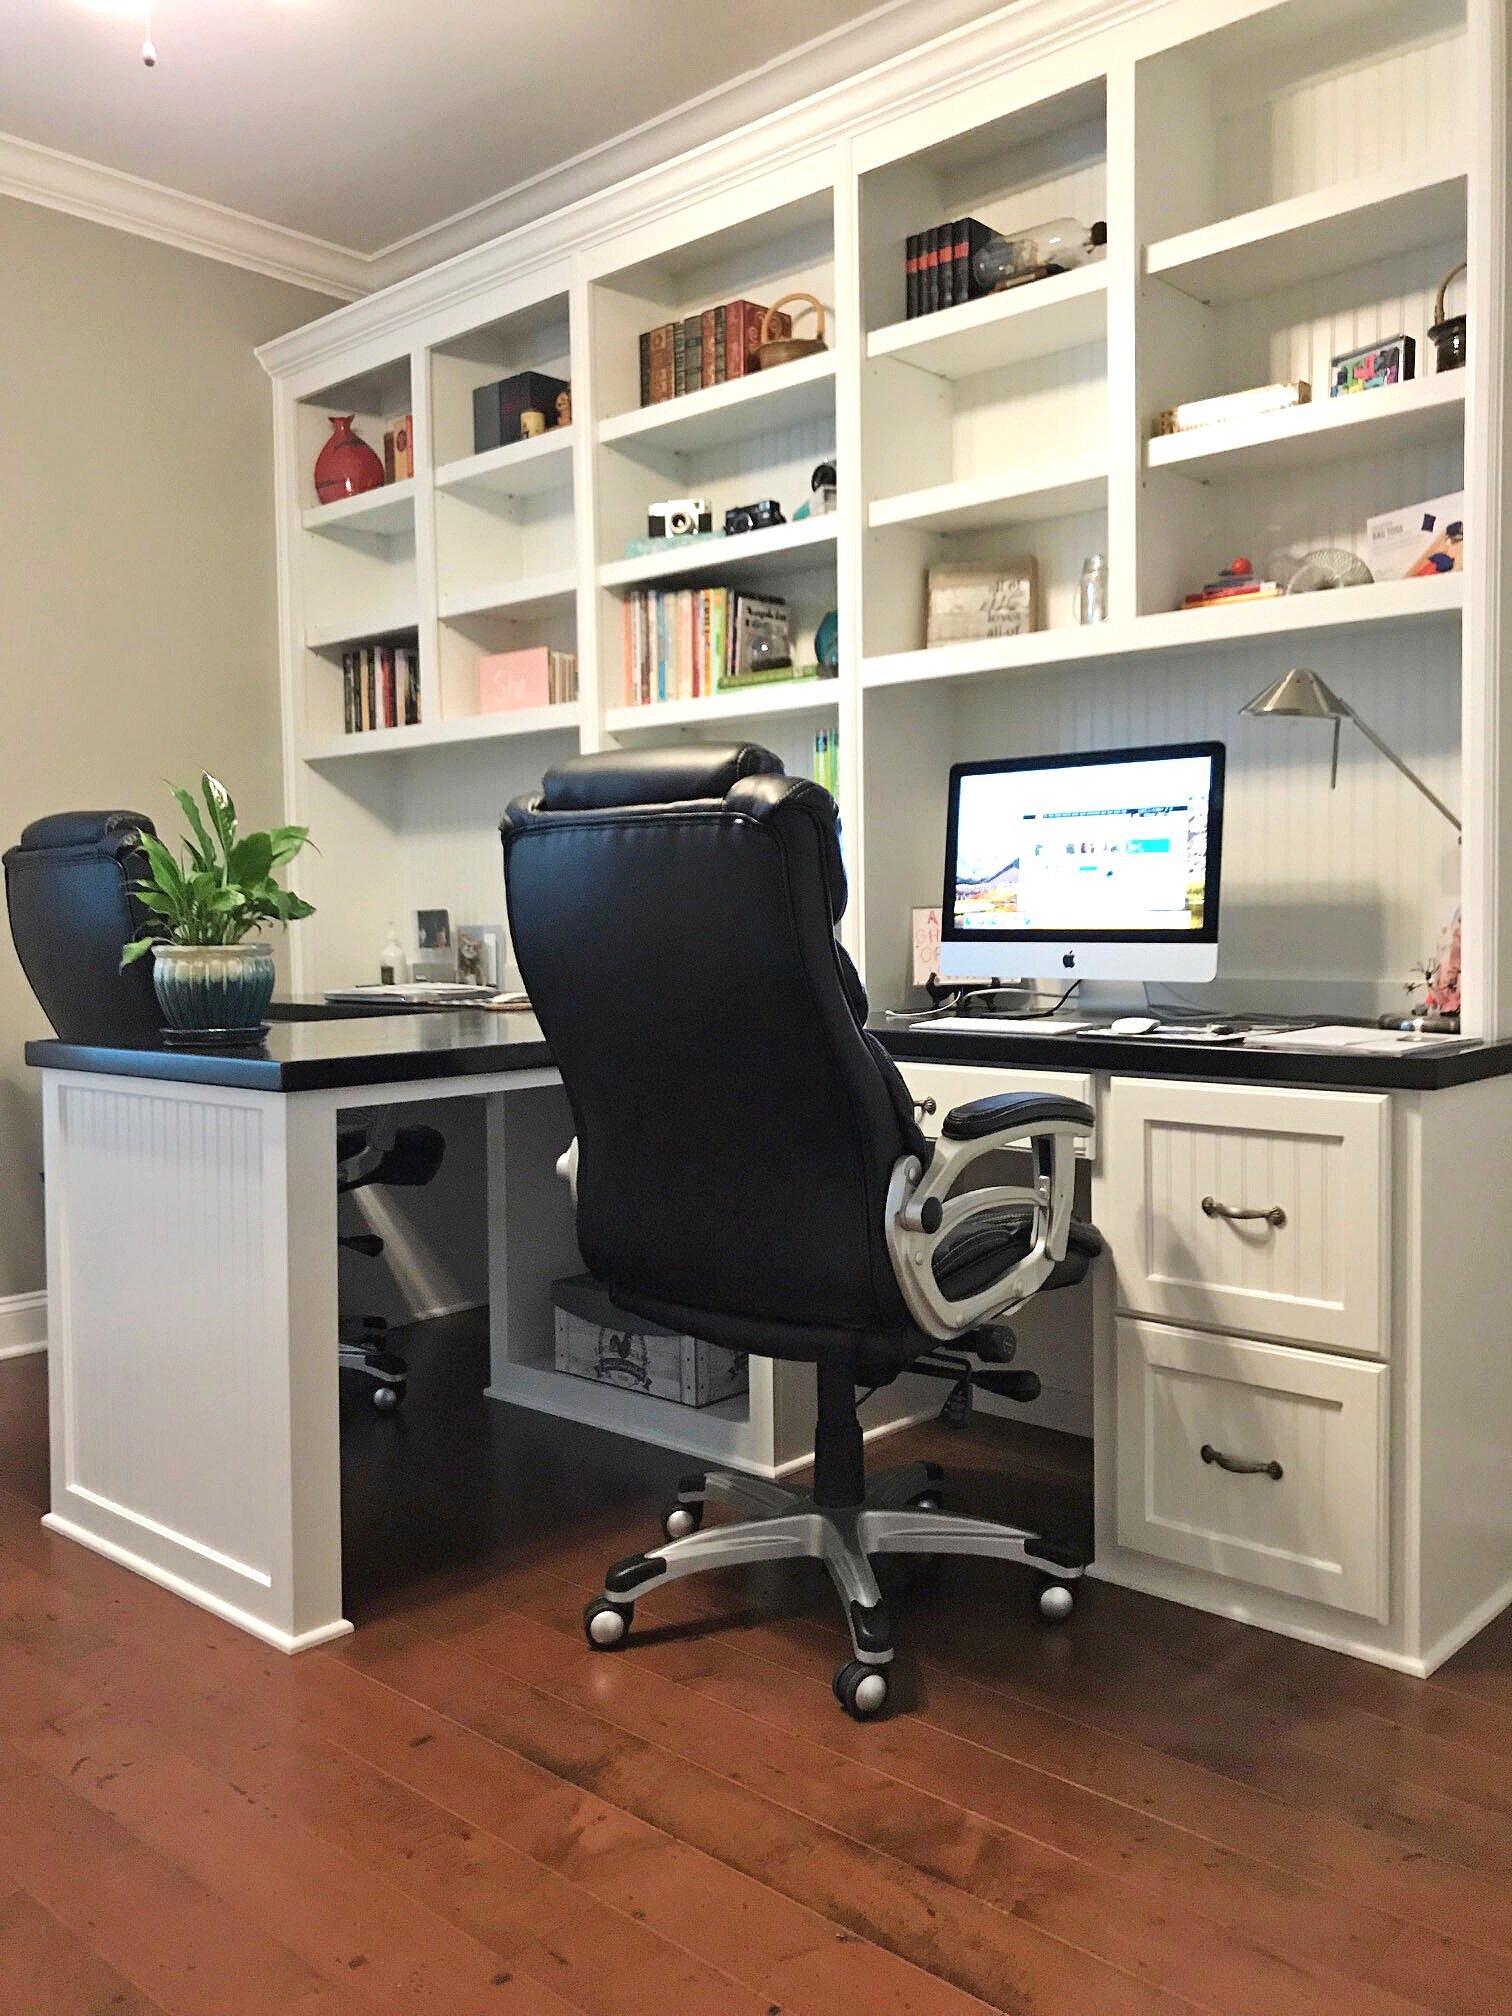 Woodmaster Custom Cabinets, Office Desk With Bookcase And Shelving Unit